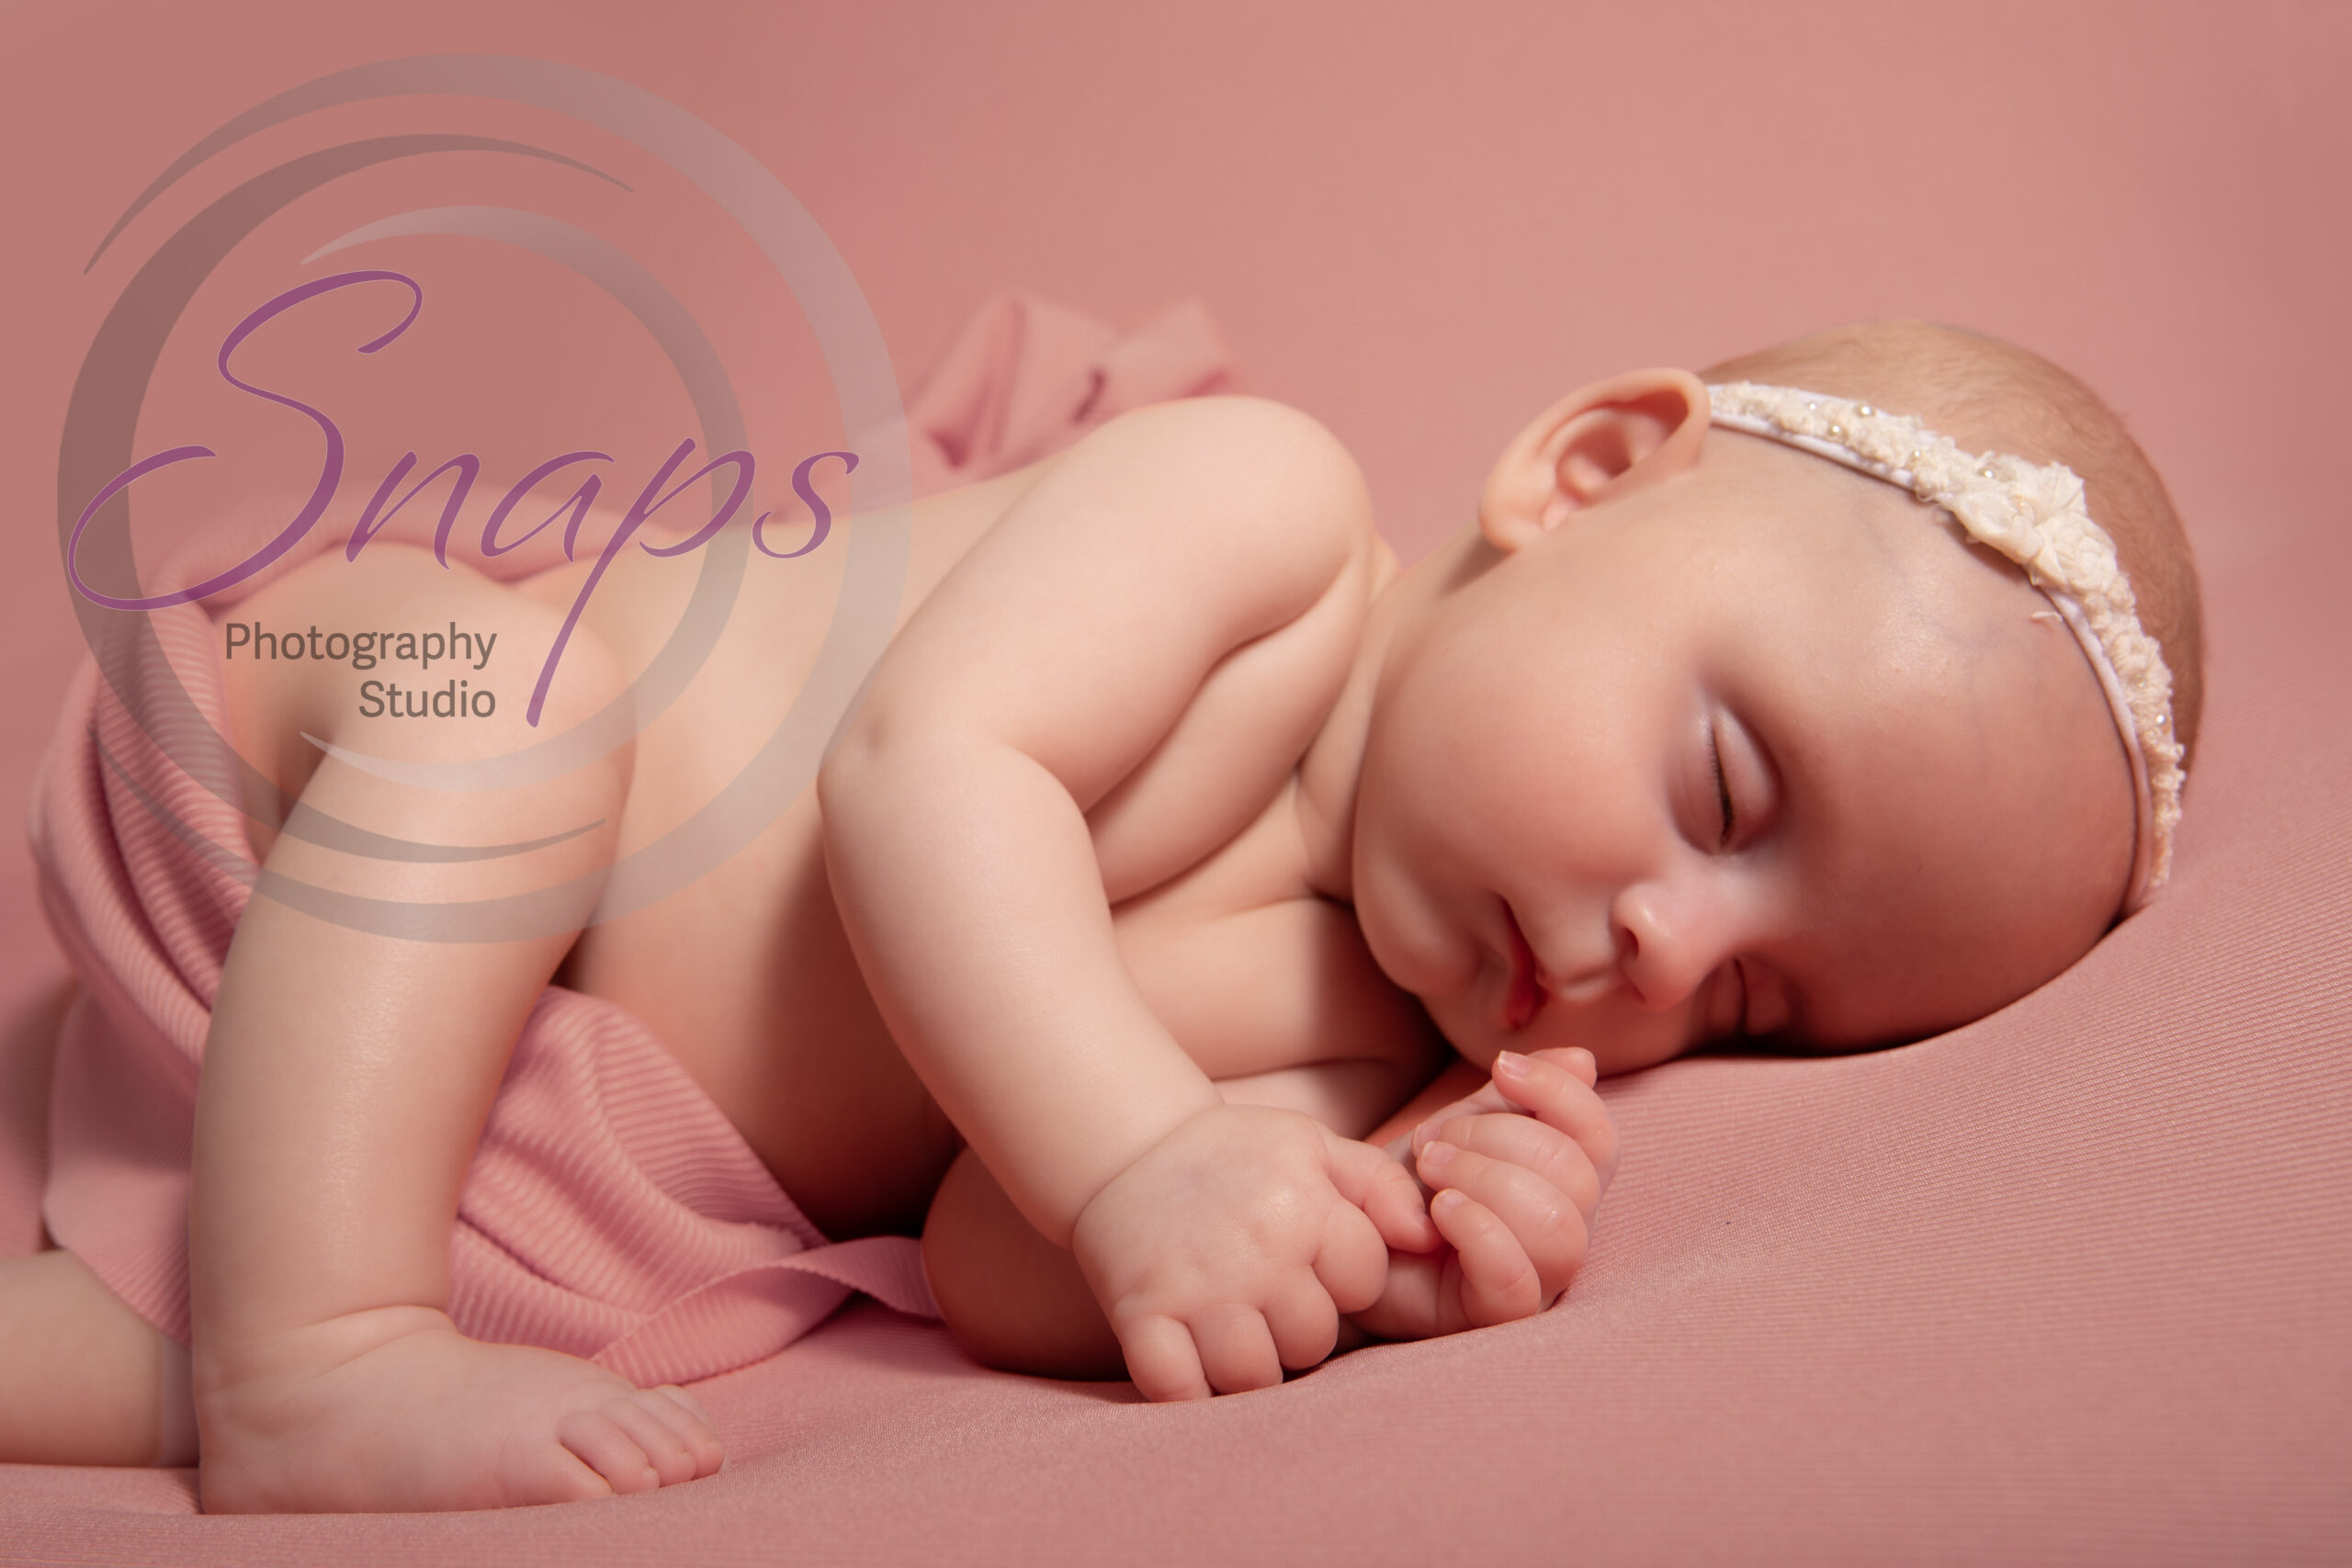 Baby sleeping on a pink bed